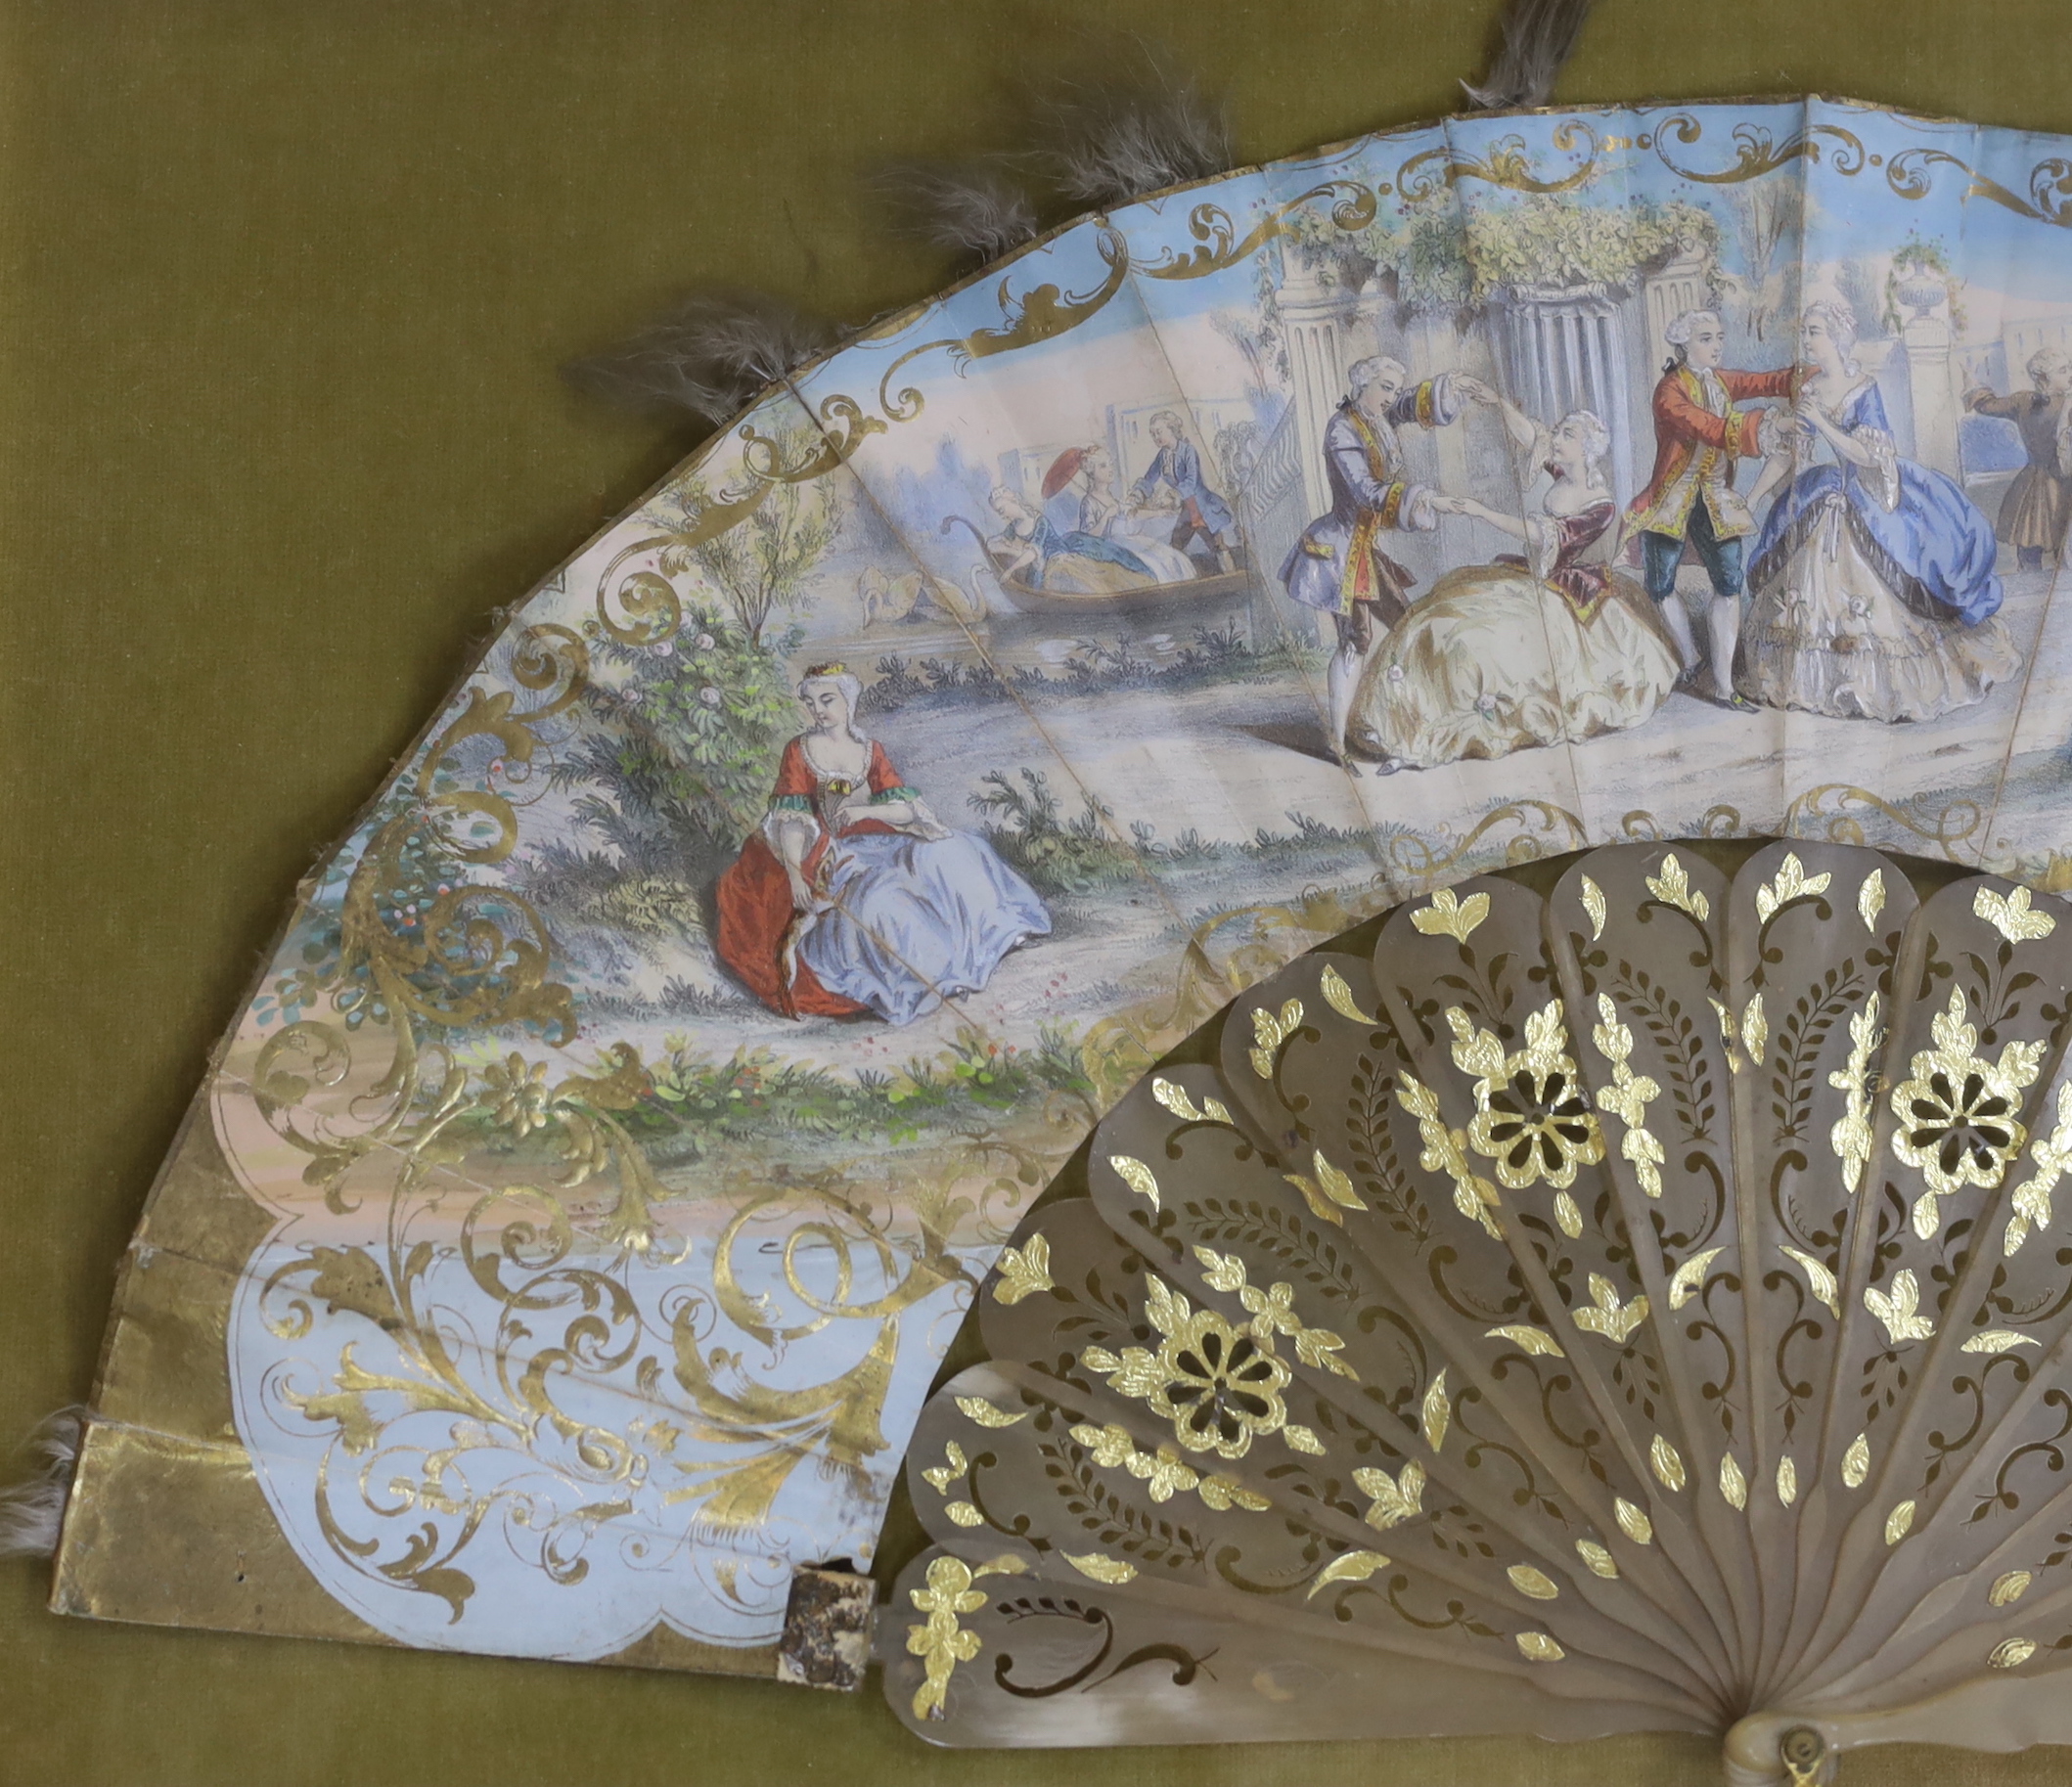 A 19th century fan, hand painted with figures wearing 18th century dress, framed, 57 x 37cm - Image 2 of 3